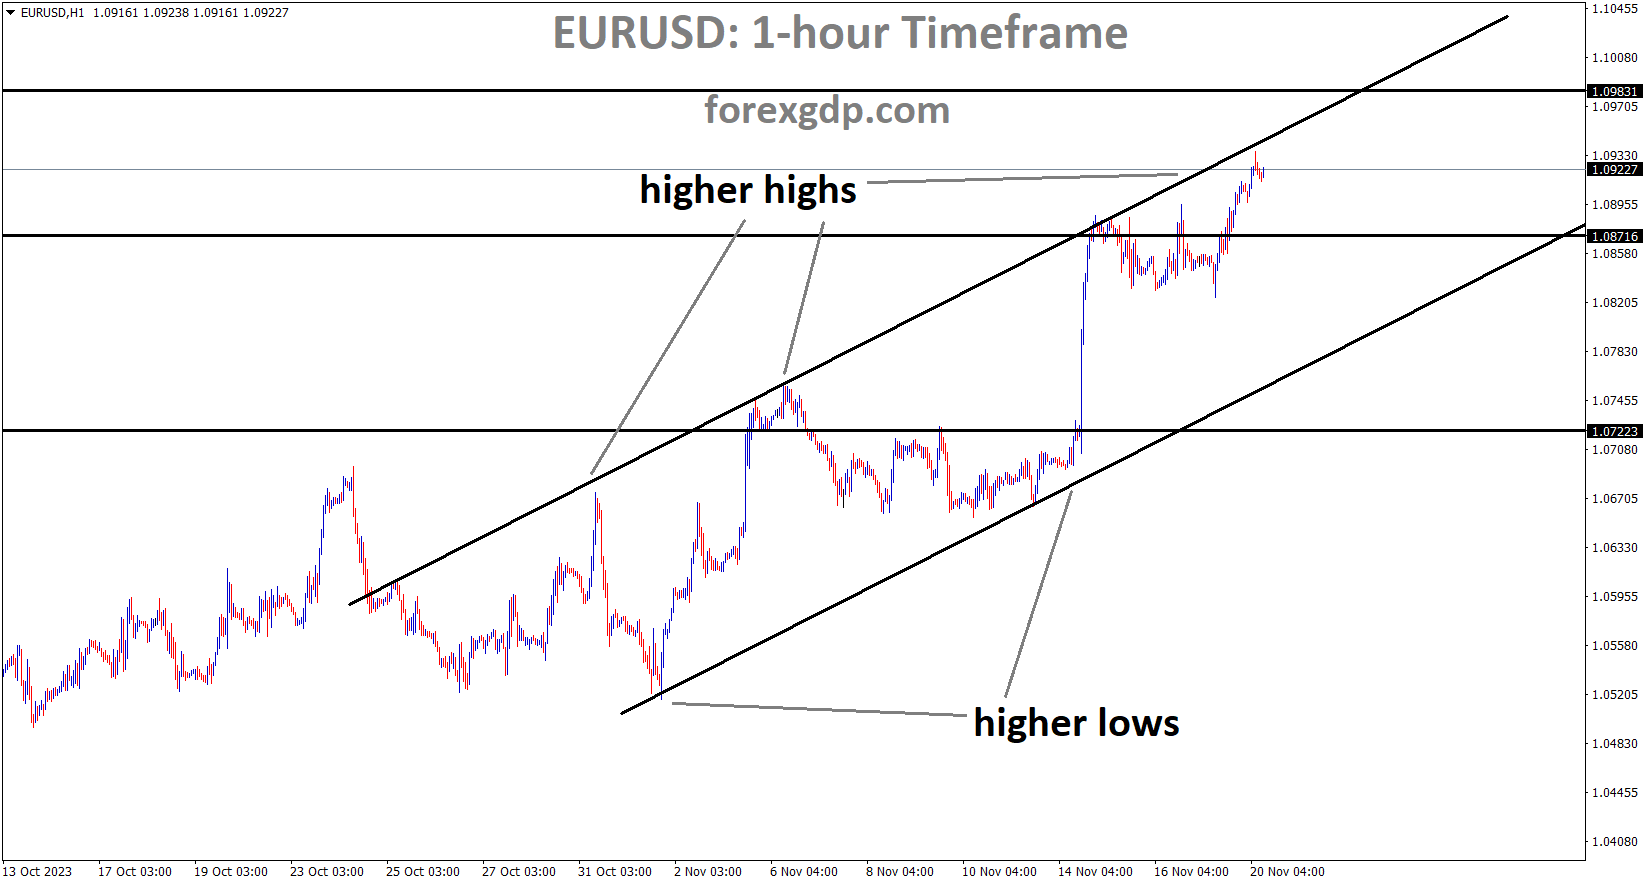 EURUSD is moving in an Ascending channel and the market has reached the higher high area of the channel